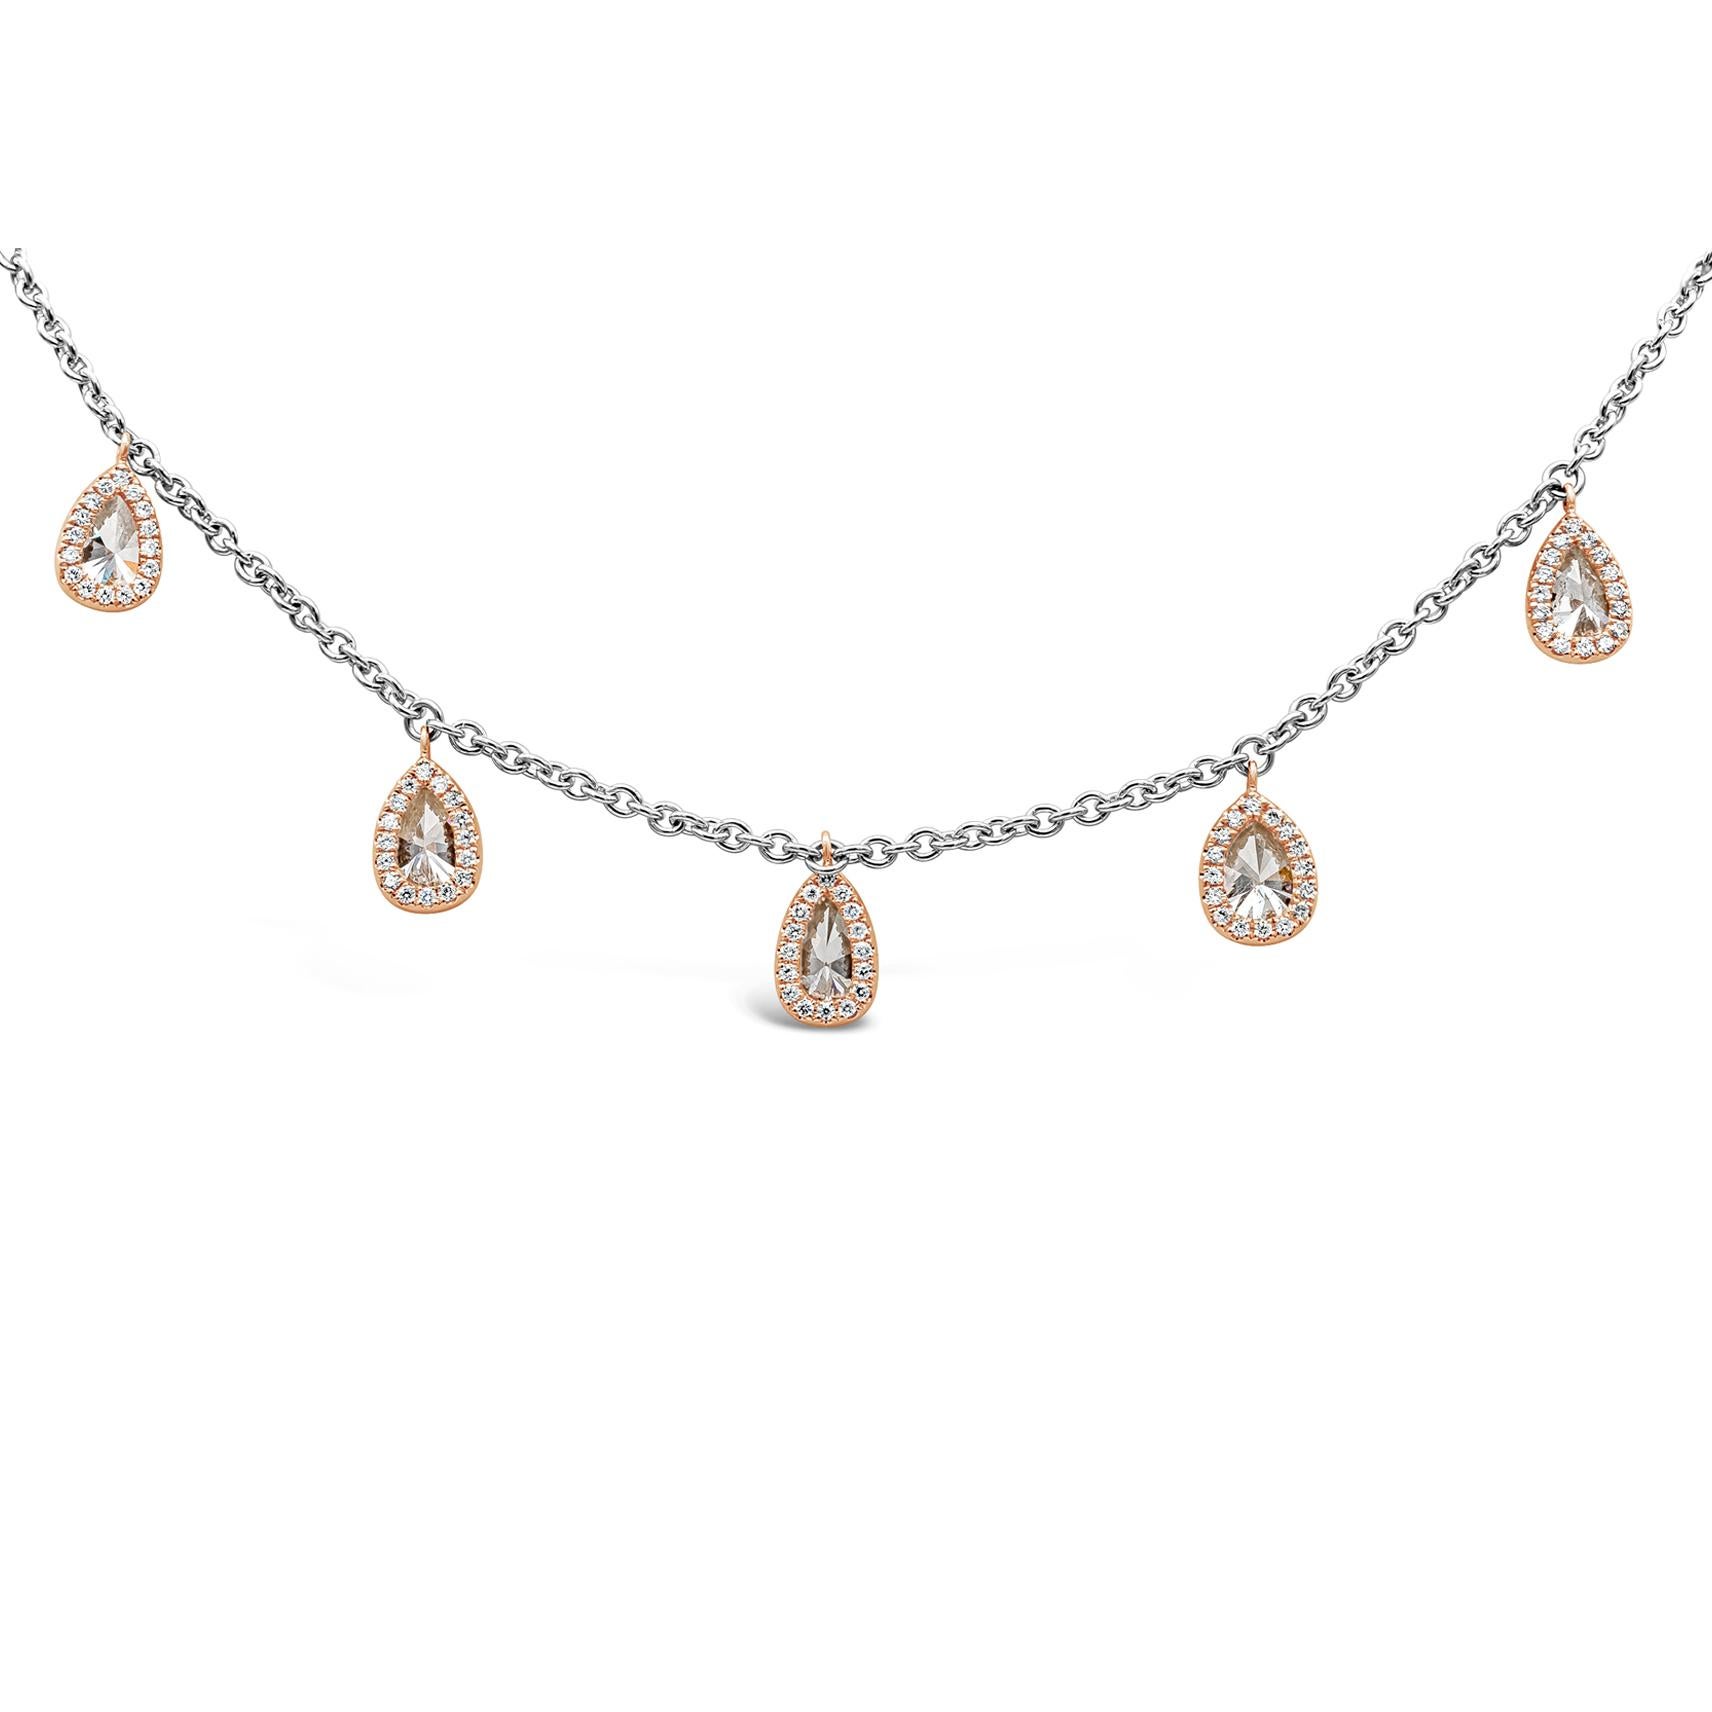 A unique style double-sided necklace featuring pear shape diamonds spaced evenly on a 19 inch platinum chain. Reversing the necklace showcases a brilliant diamond halo along the bezel of the diamond and constitutes another style of the necklace.